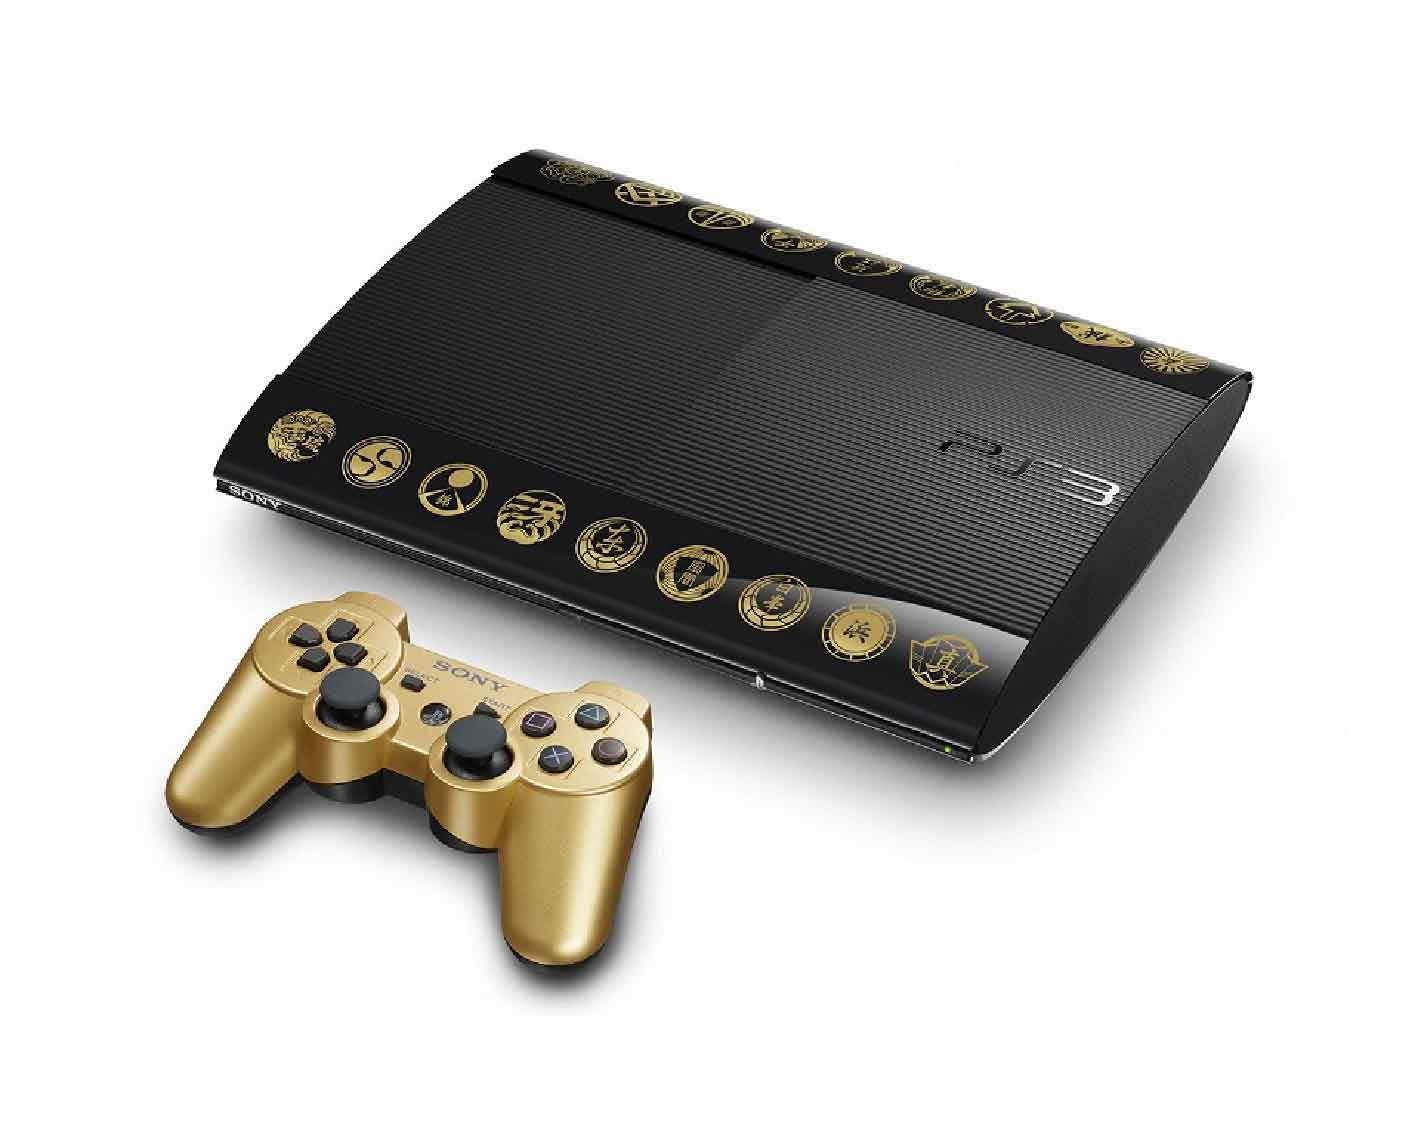 PlayStation 5 Limited Editions with black carbon, leather or gold